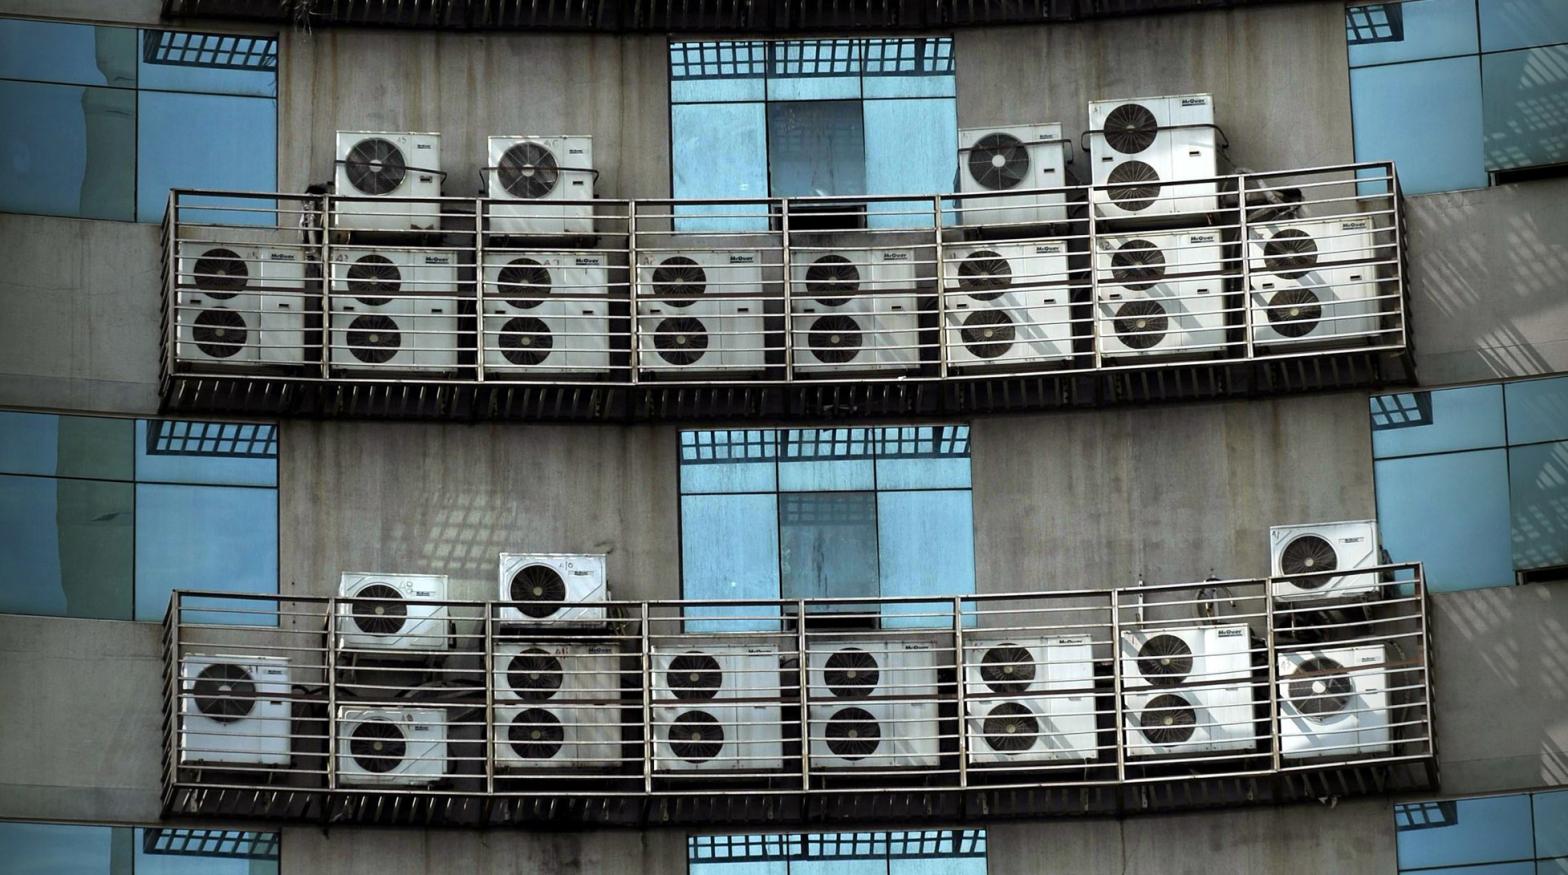 Air conditioners hang on the wall of an office building in Fuzhou, China. (Photo: VCG, Getty Images)